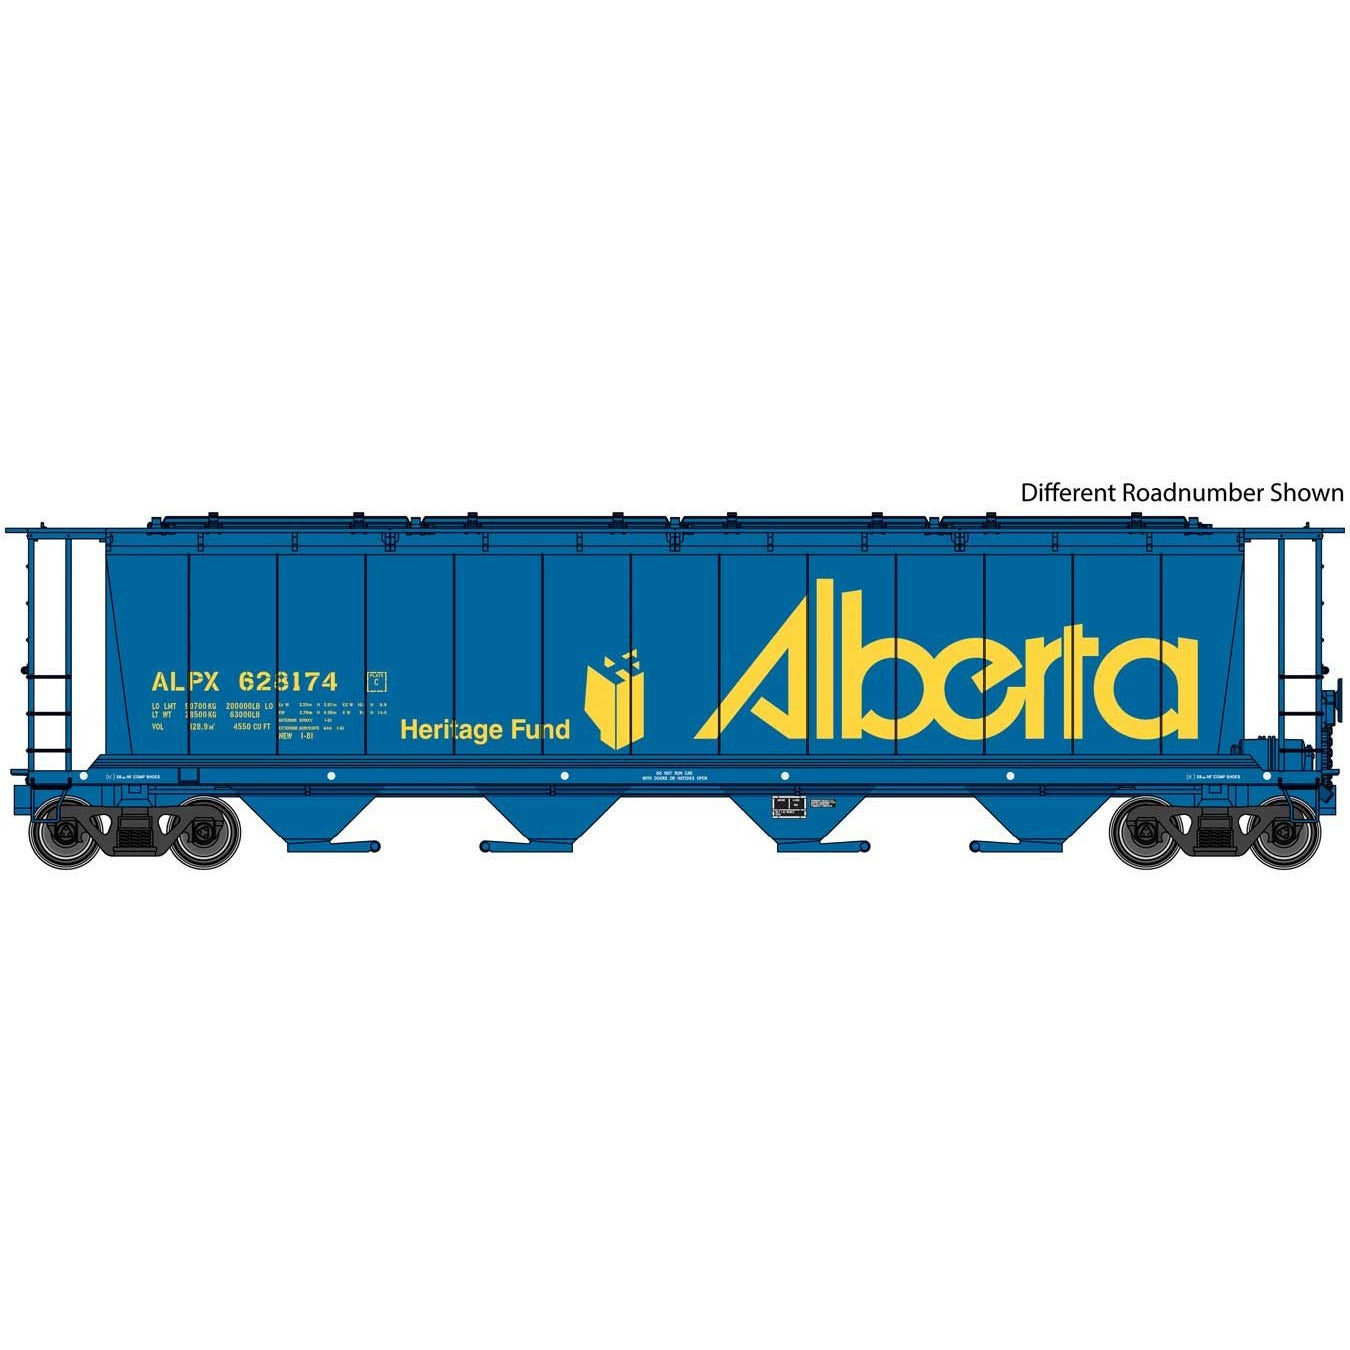 59' Cylindrical Hopper - Ready to Run -- Alberta ALPX #628267 (blue, yellow; Heritage Fund Logo, Large Name)